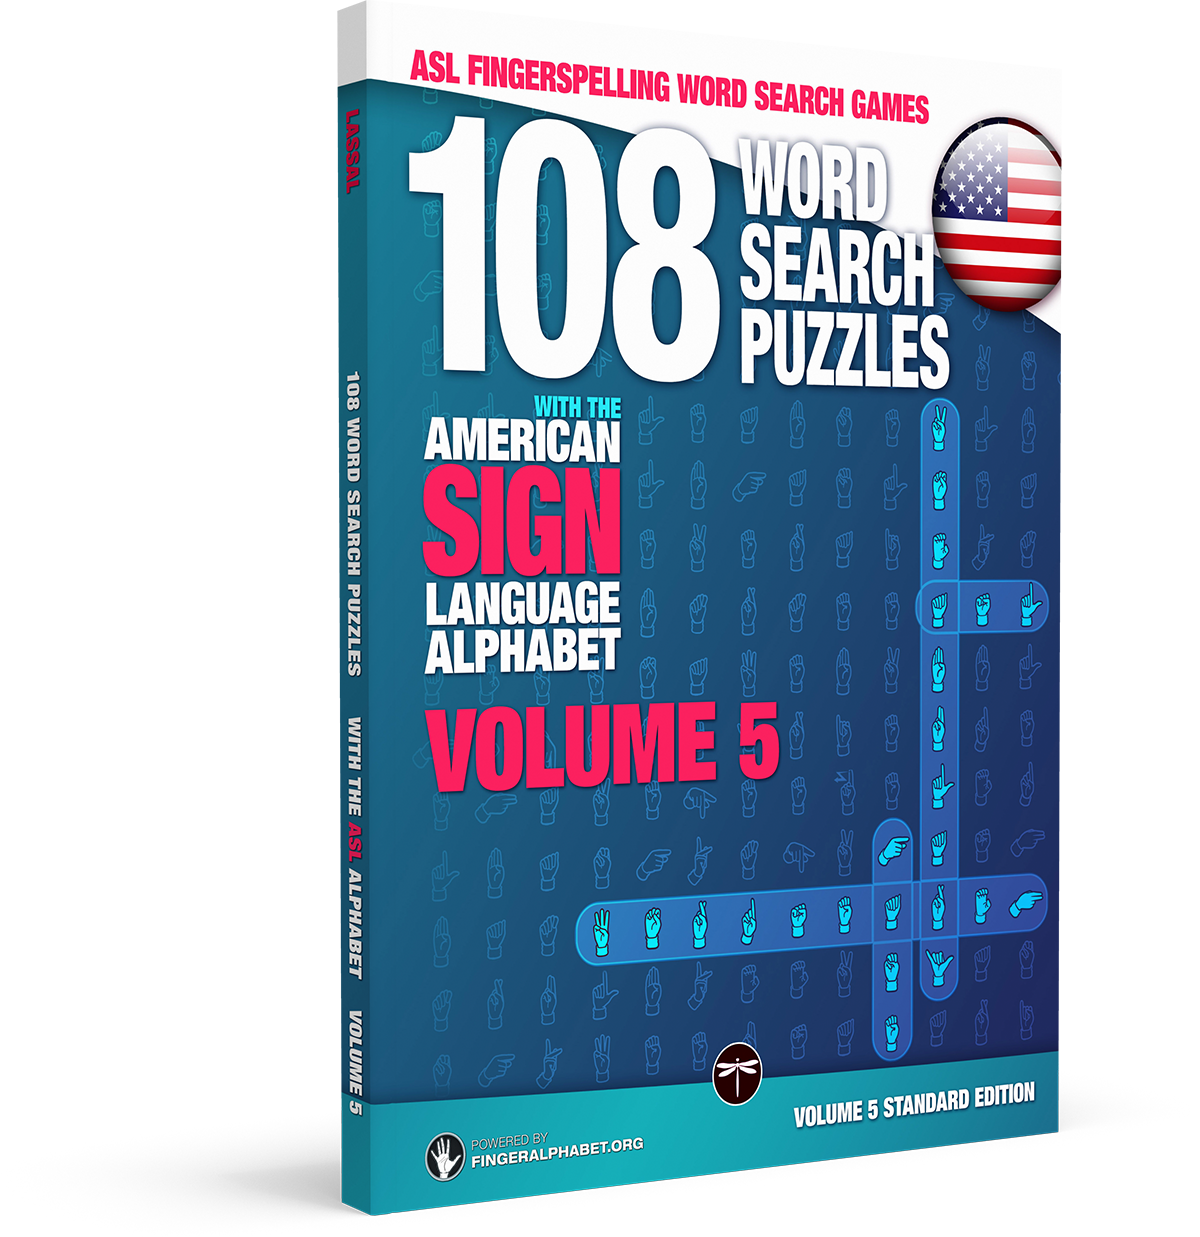 ASL WORD SEARCH BOOKS FOR ADULTS / Volume 04 (Bundle Volumes 01+02+03)